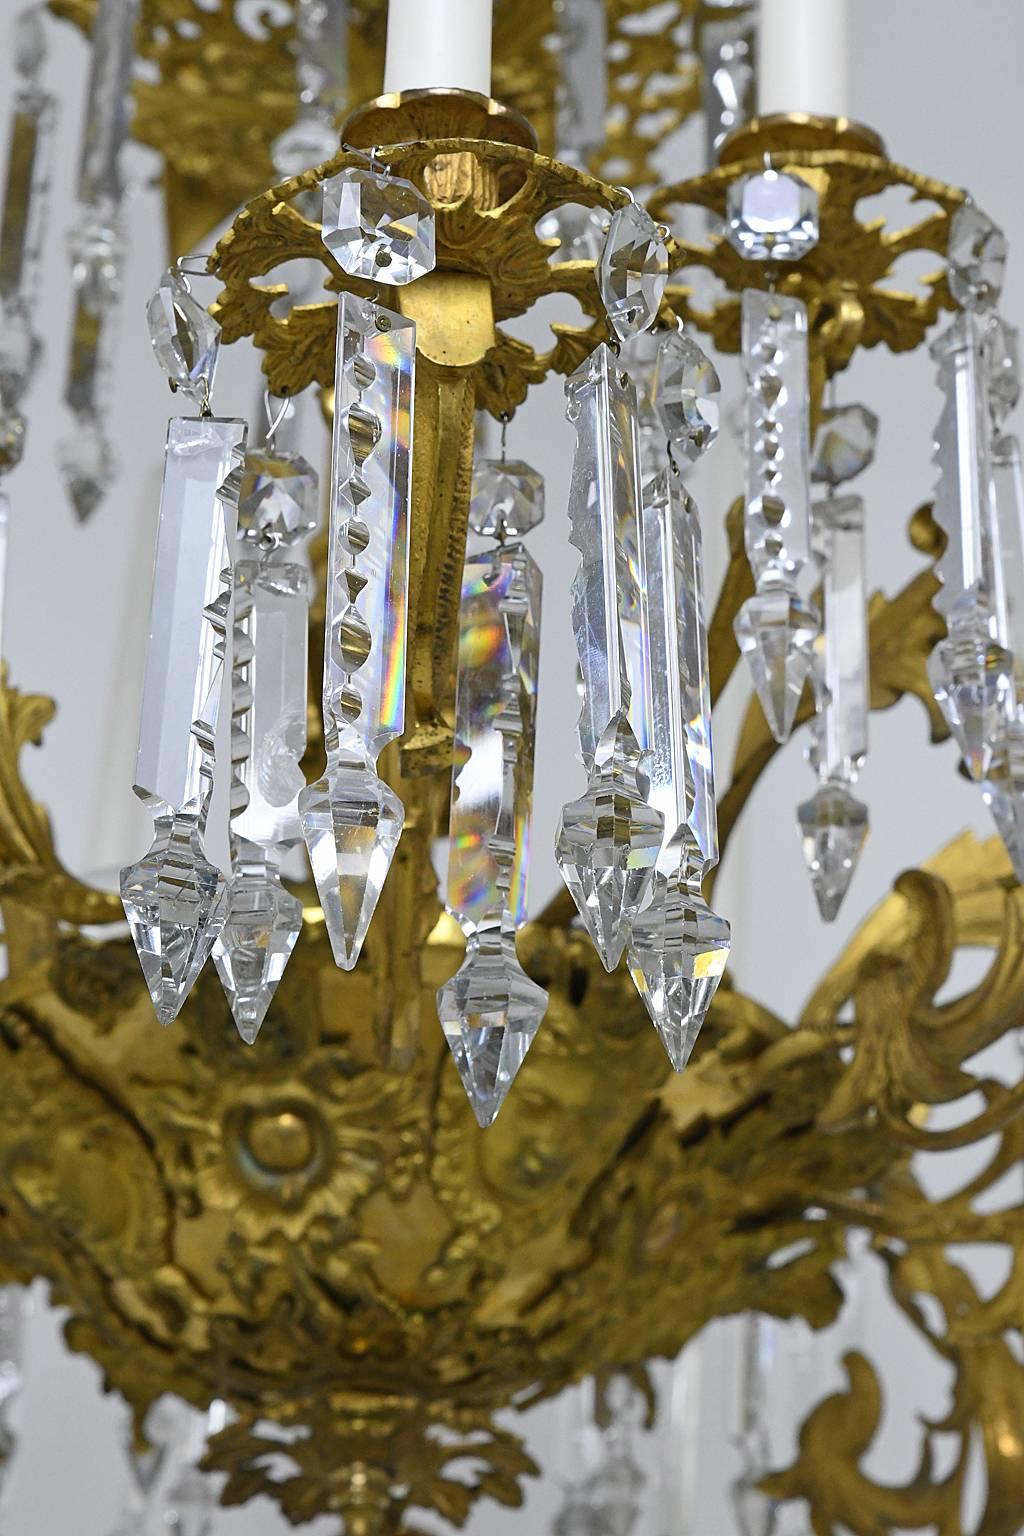 Mid-19th Century French Rococo Style Bronze Doré Chandelier with 16 Candles & 6 lights, ca 1840